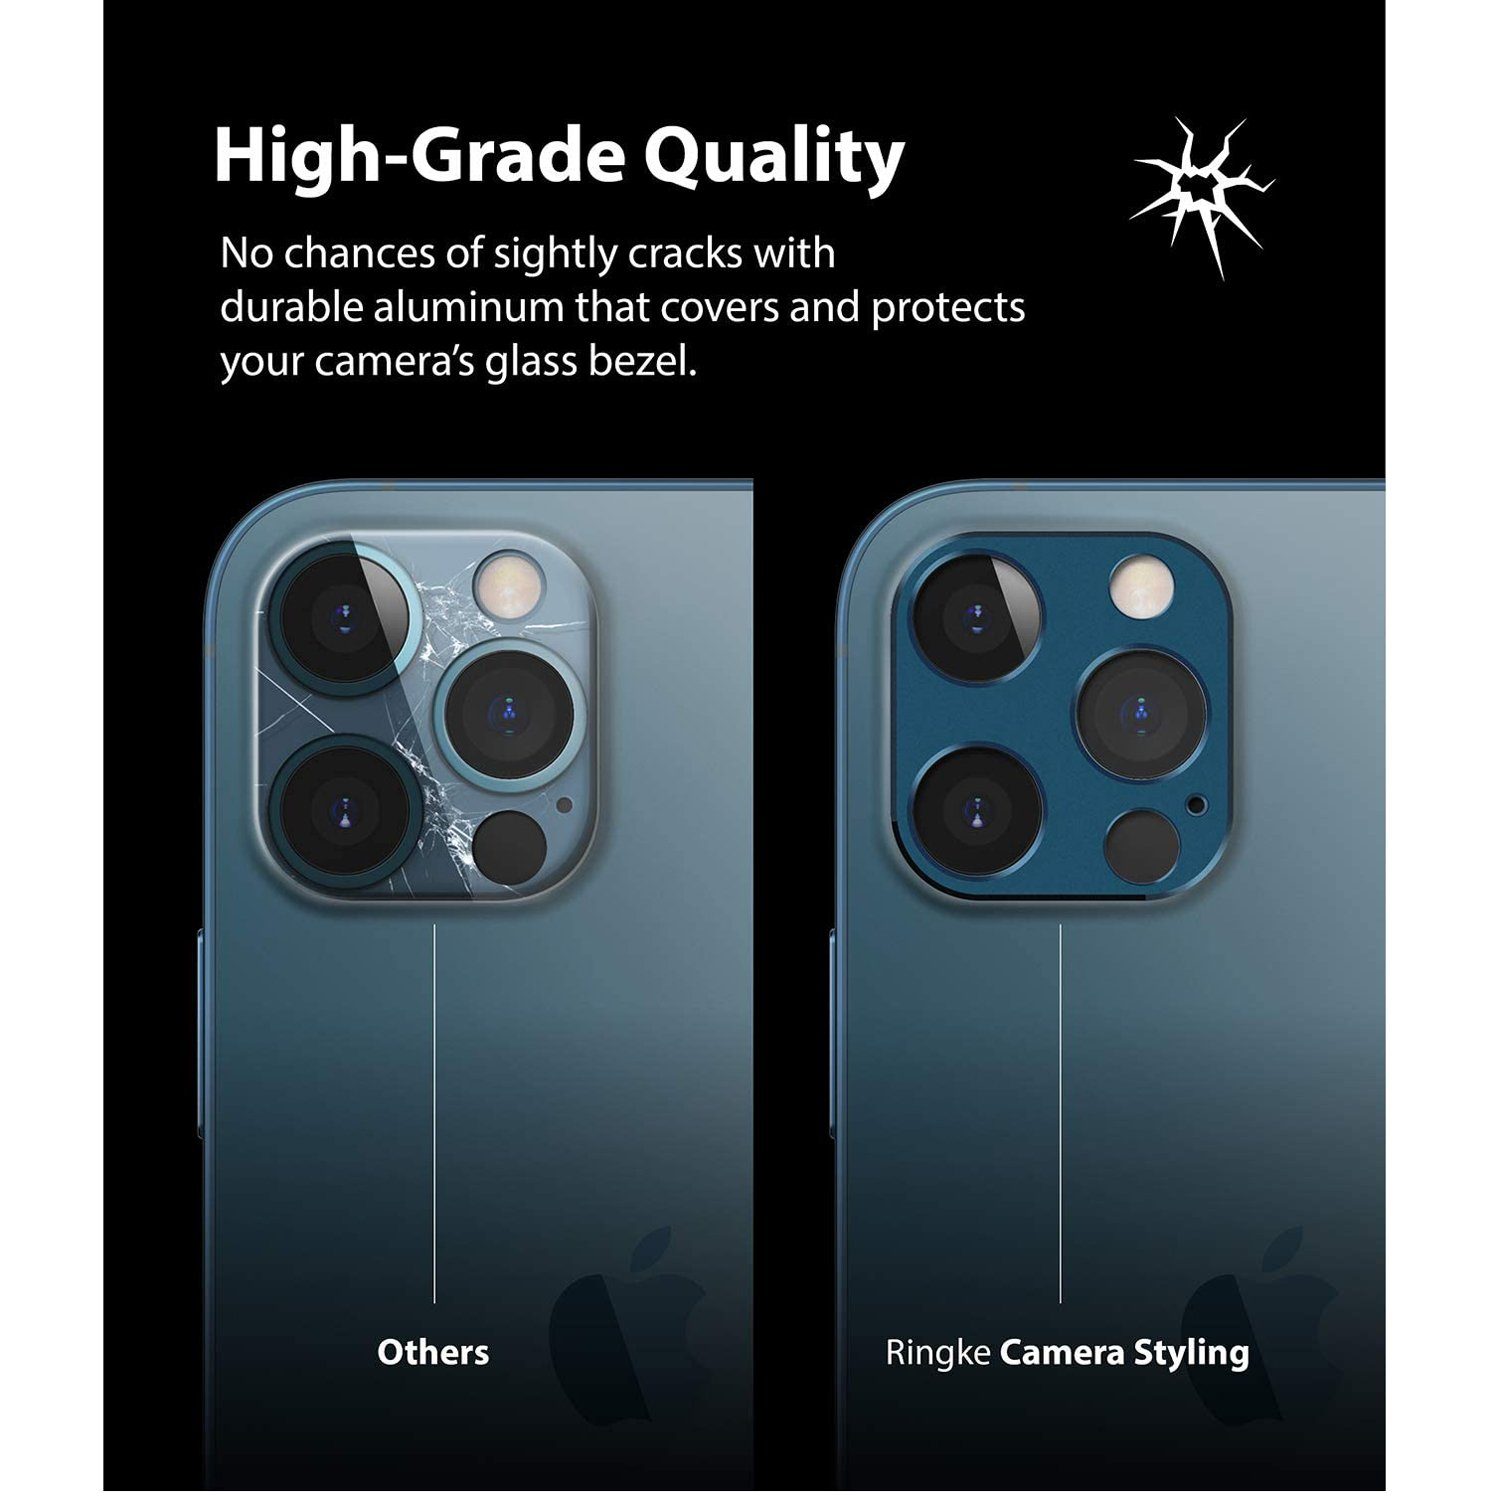 Ringke Camera Styling for iPhone 12 Pro 6.1"/12 Pro Max 6.7"